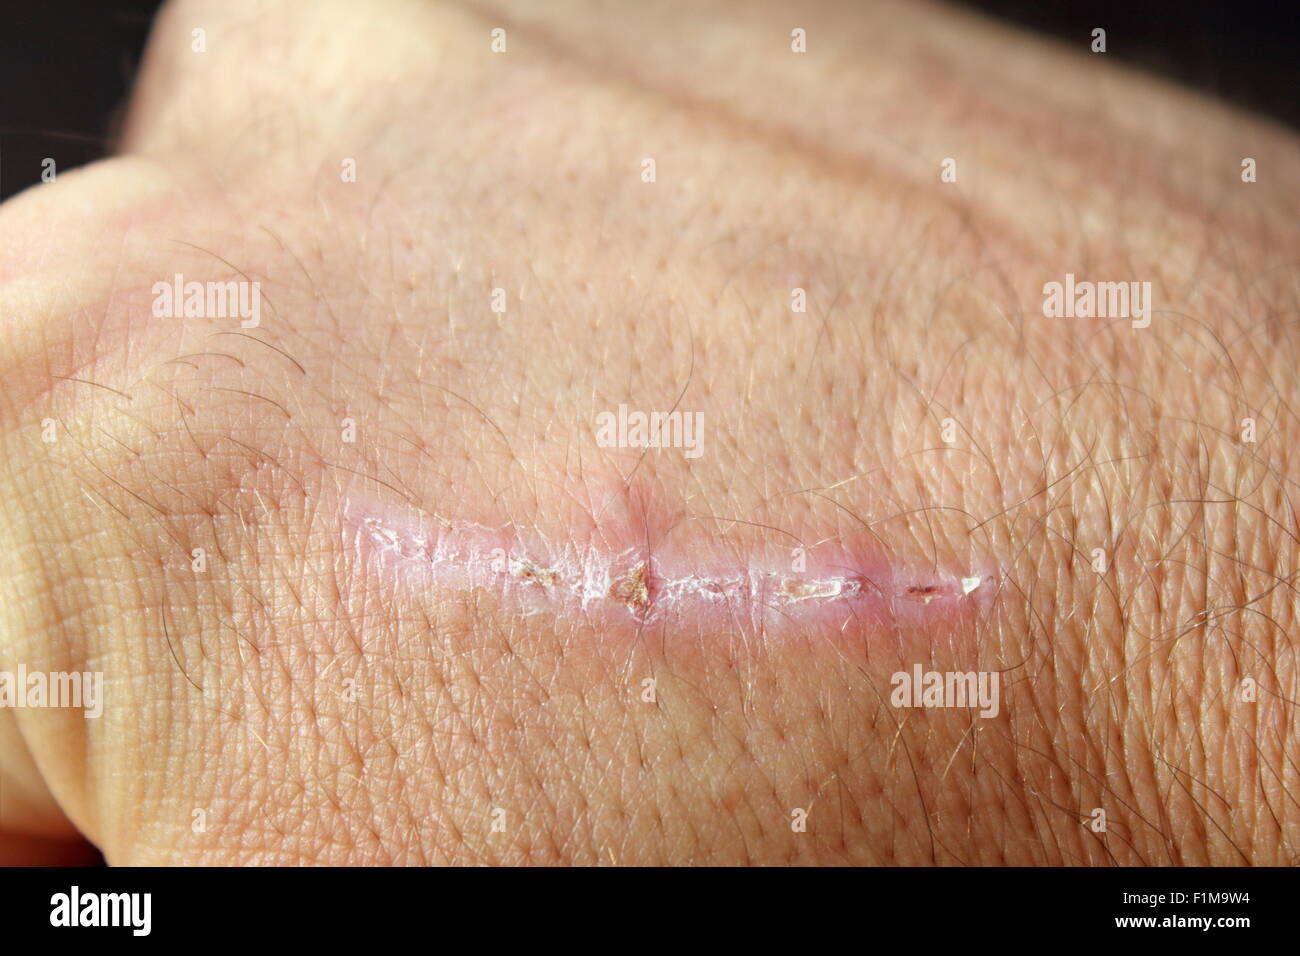 wound healing scar on man's hand Stock Photo